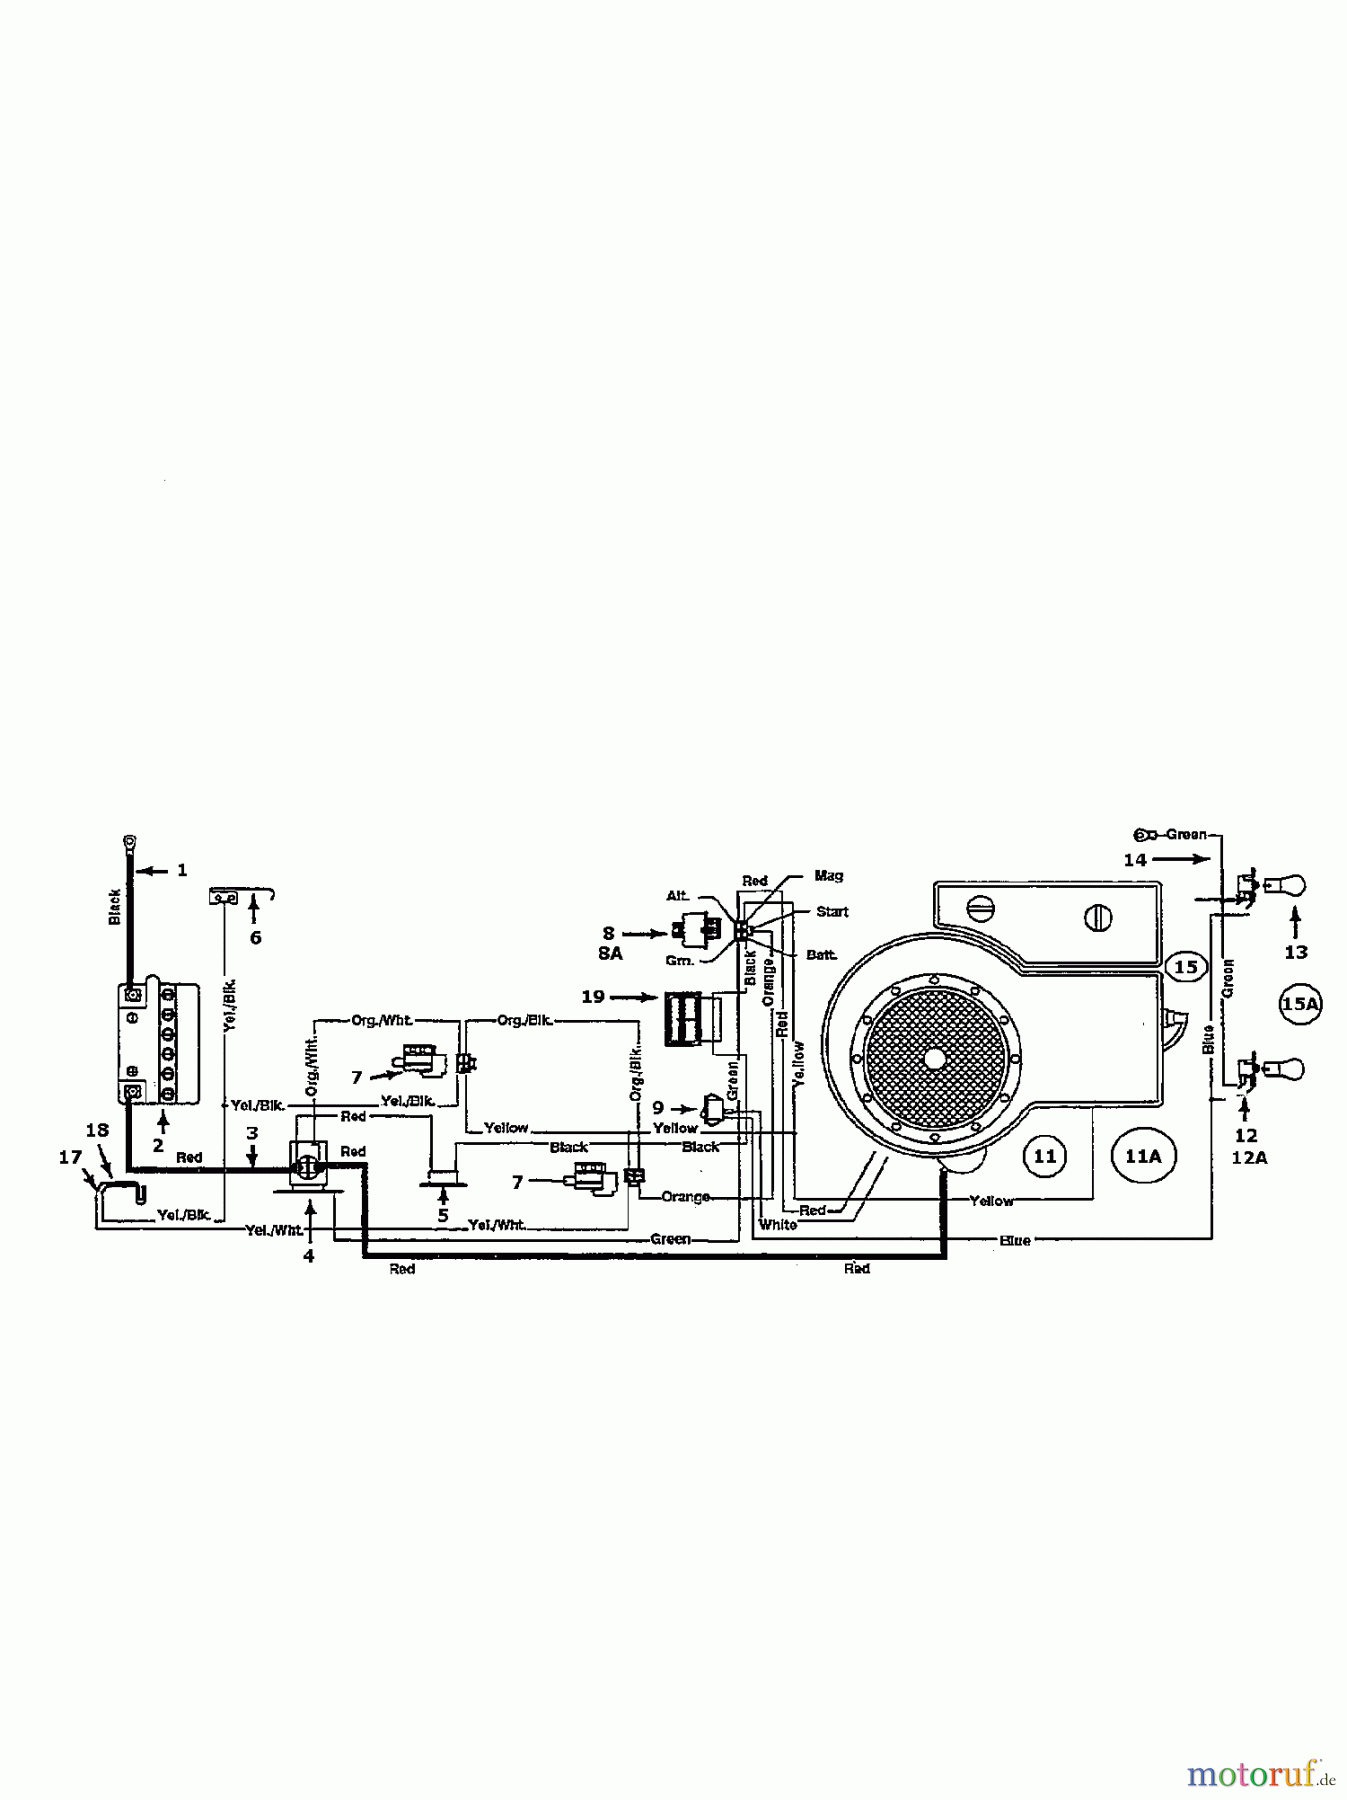  Floraself Lawn tractors FLORASELF 2000 135C452D668  (1995) Wiring diagram single cylinder